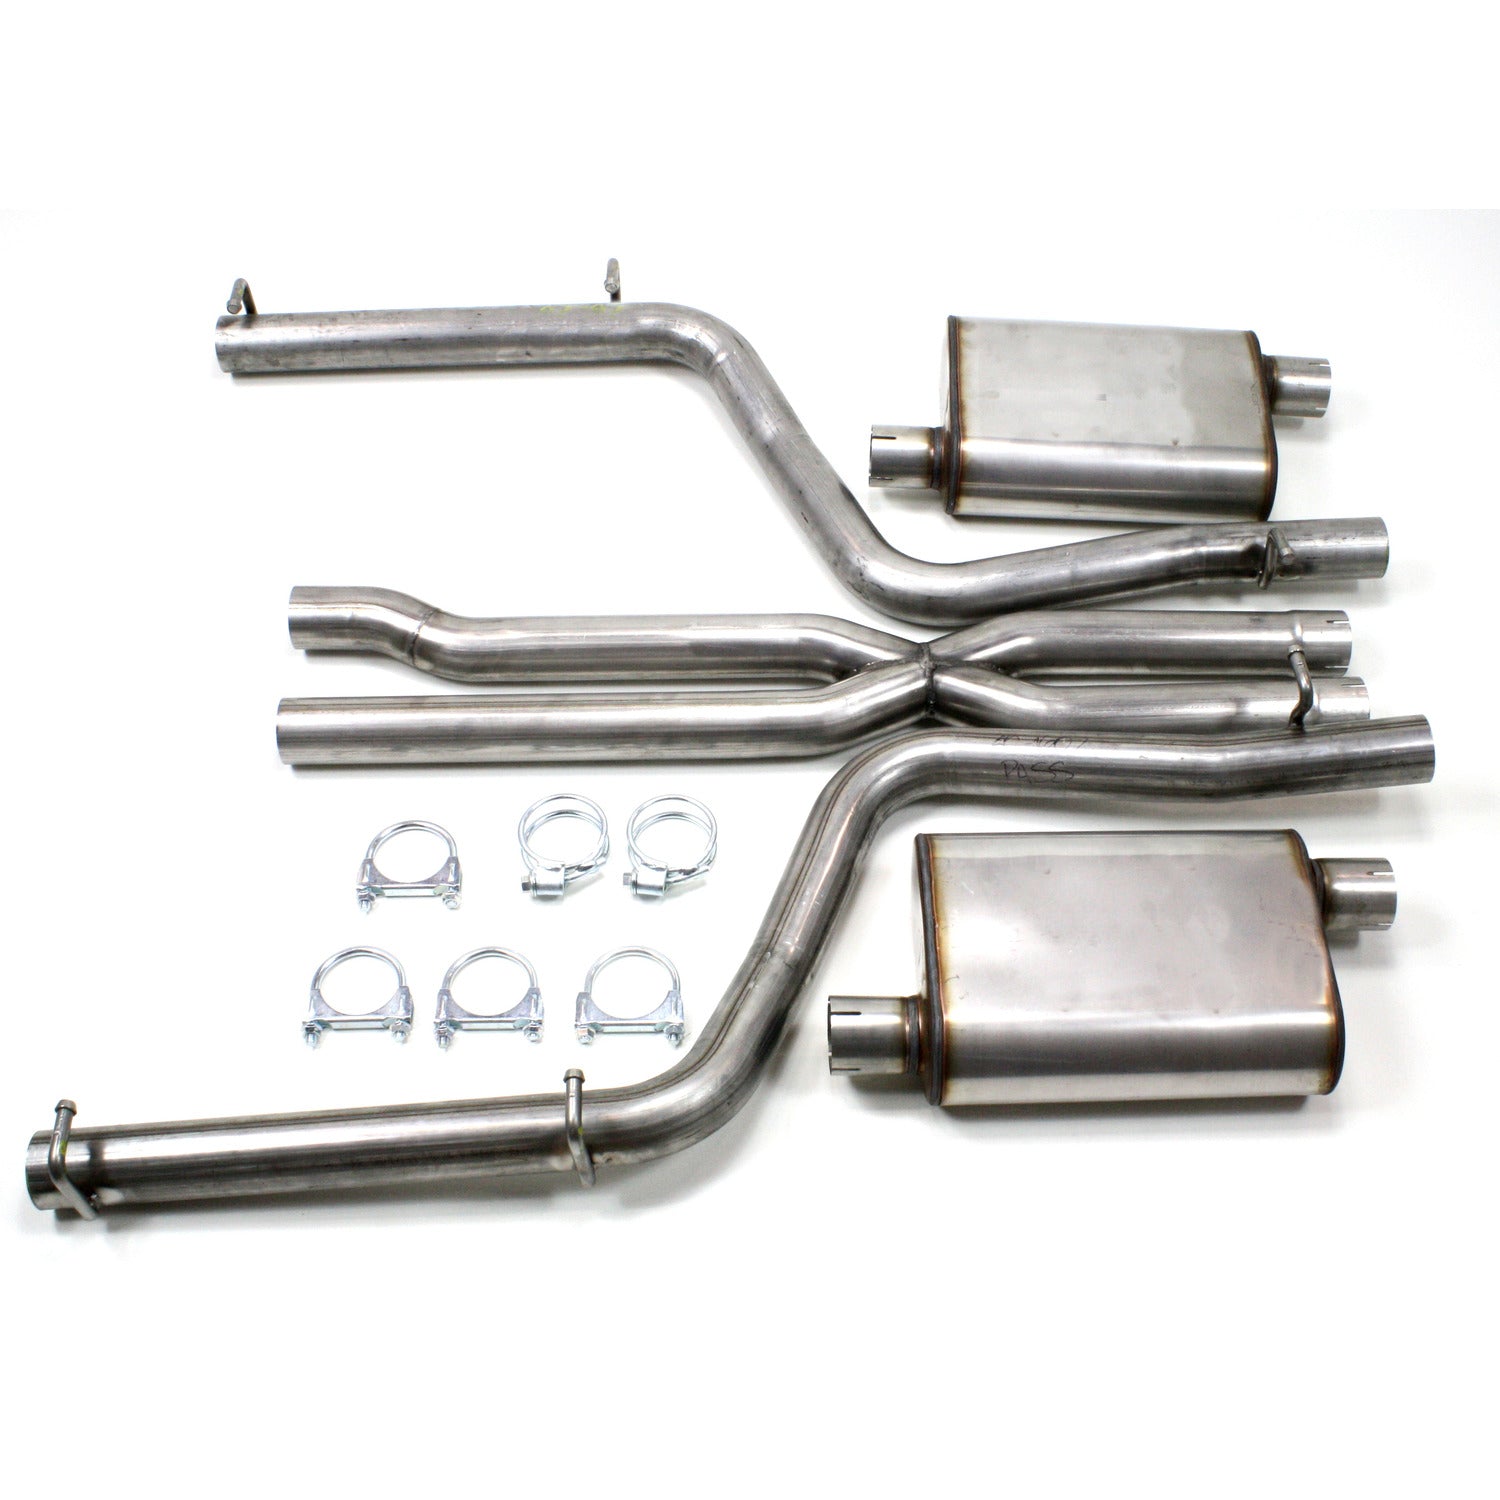 JBA Performance Exhaust 40-1602 2.5" Stainless Steel Exhaust System 2011-14 Dodge Charger & 300C 5.7L